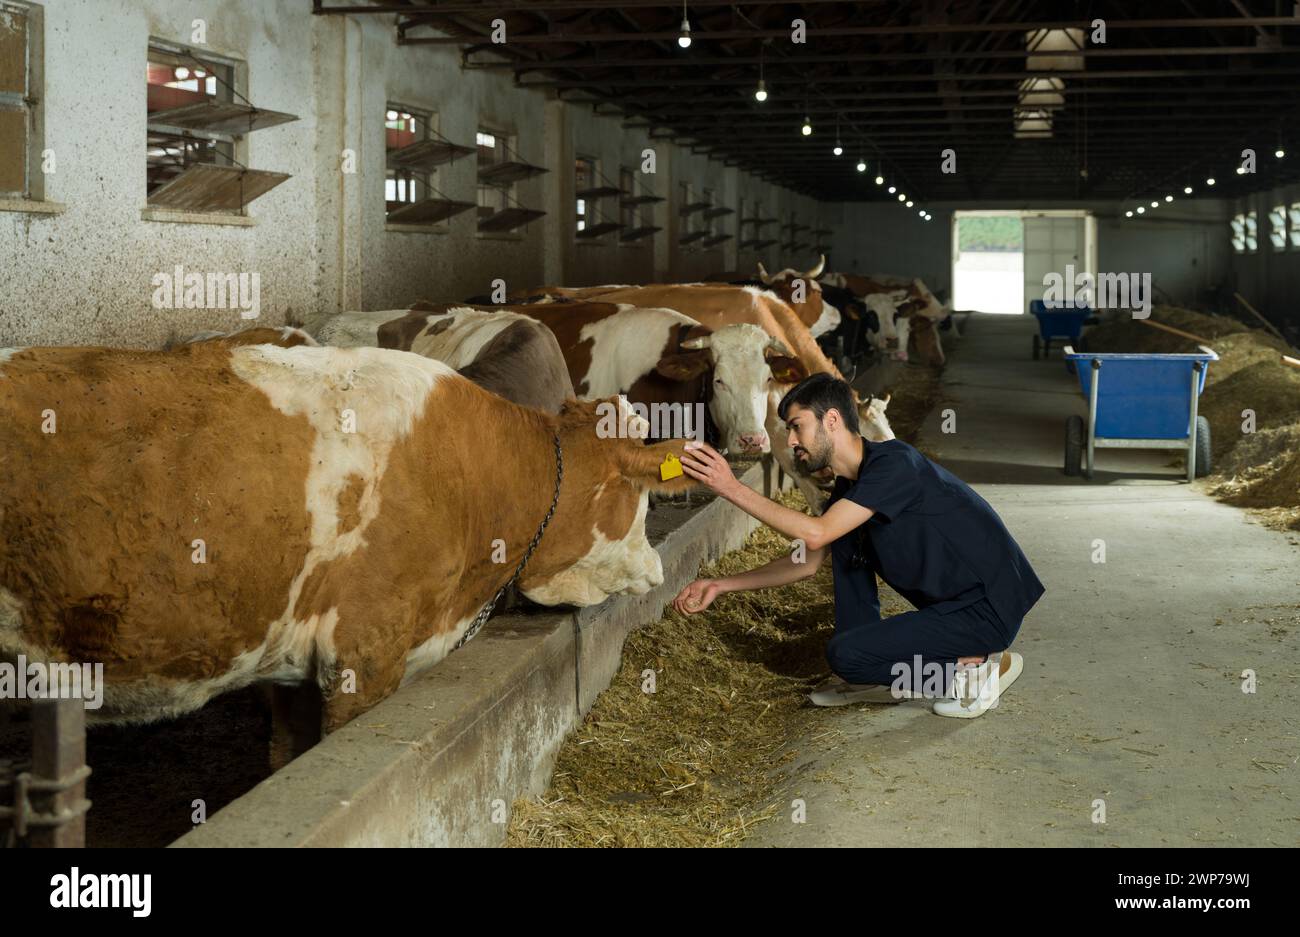 Young veterinary man examining cows. Attendant tending the cattle in the barn. Agriculture cattle industry and farming. Stock Photo